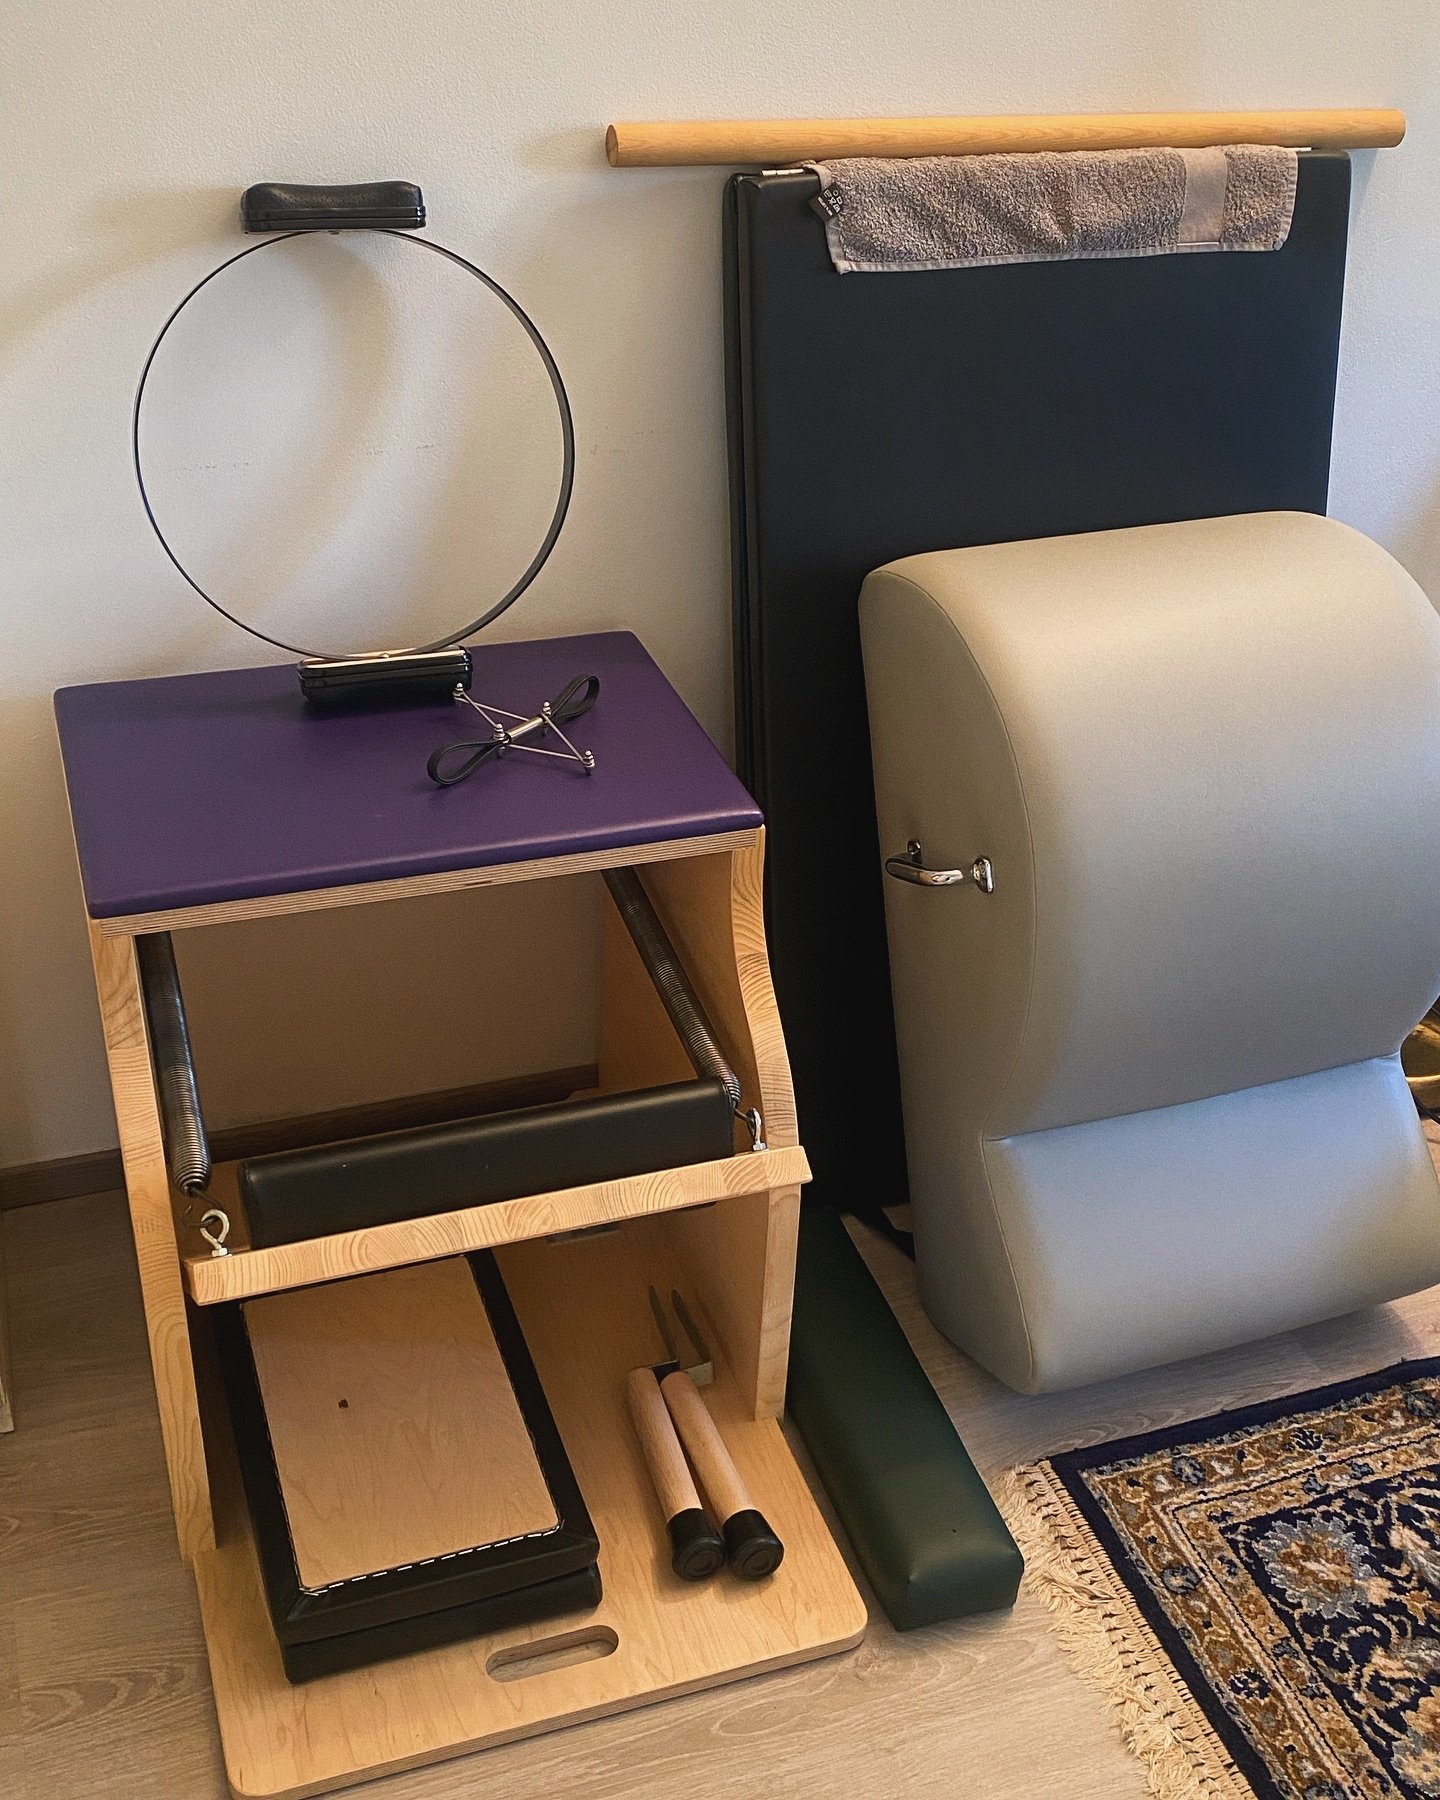 If I ever think life is chaotic, I take a look at my home studio corner 🥰 One thing I care about!

@contrology.bb folding mat &amp; wunda chair 
@legacypilates spine corrector
@arregon_pilates magic circle &amp; toe corrector
2x4 made in Finland

#p